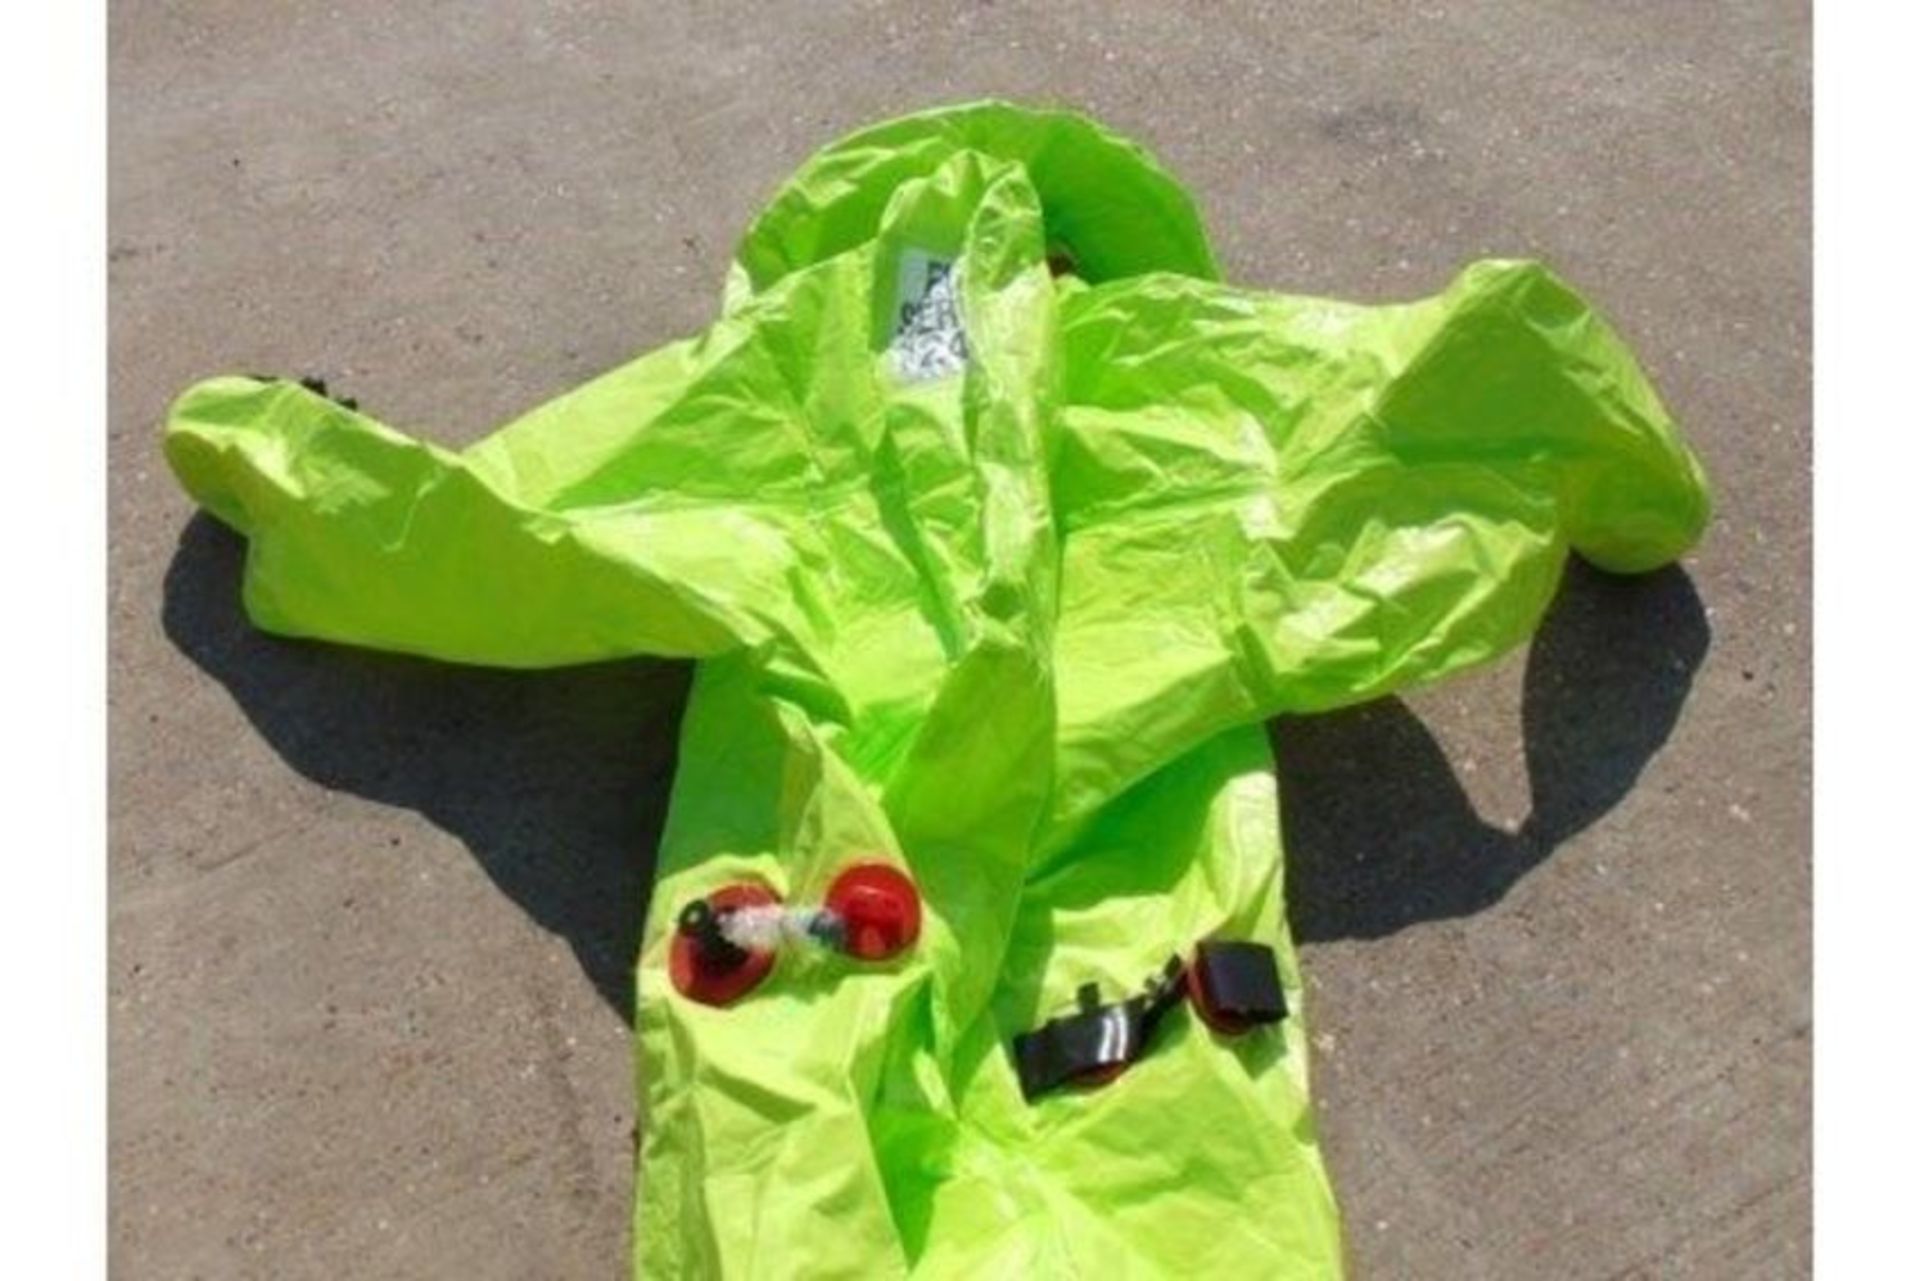 10 x Respirex Tychem TK Gas-Tight Hazmat Suit Type 1A with Attached Boots and Gloves - Image 9 of 10